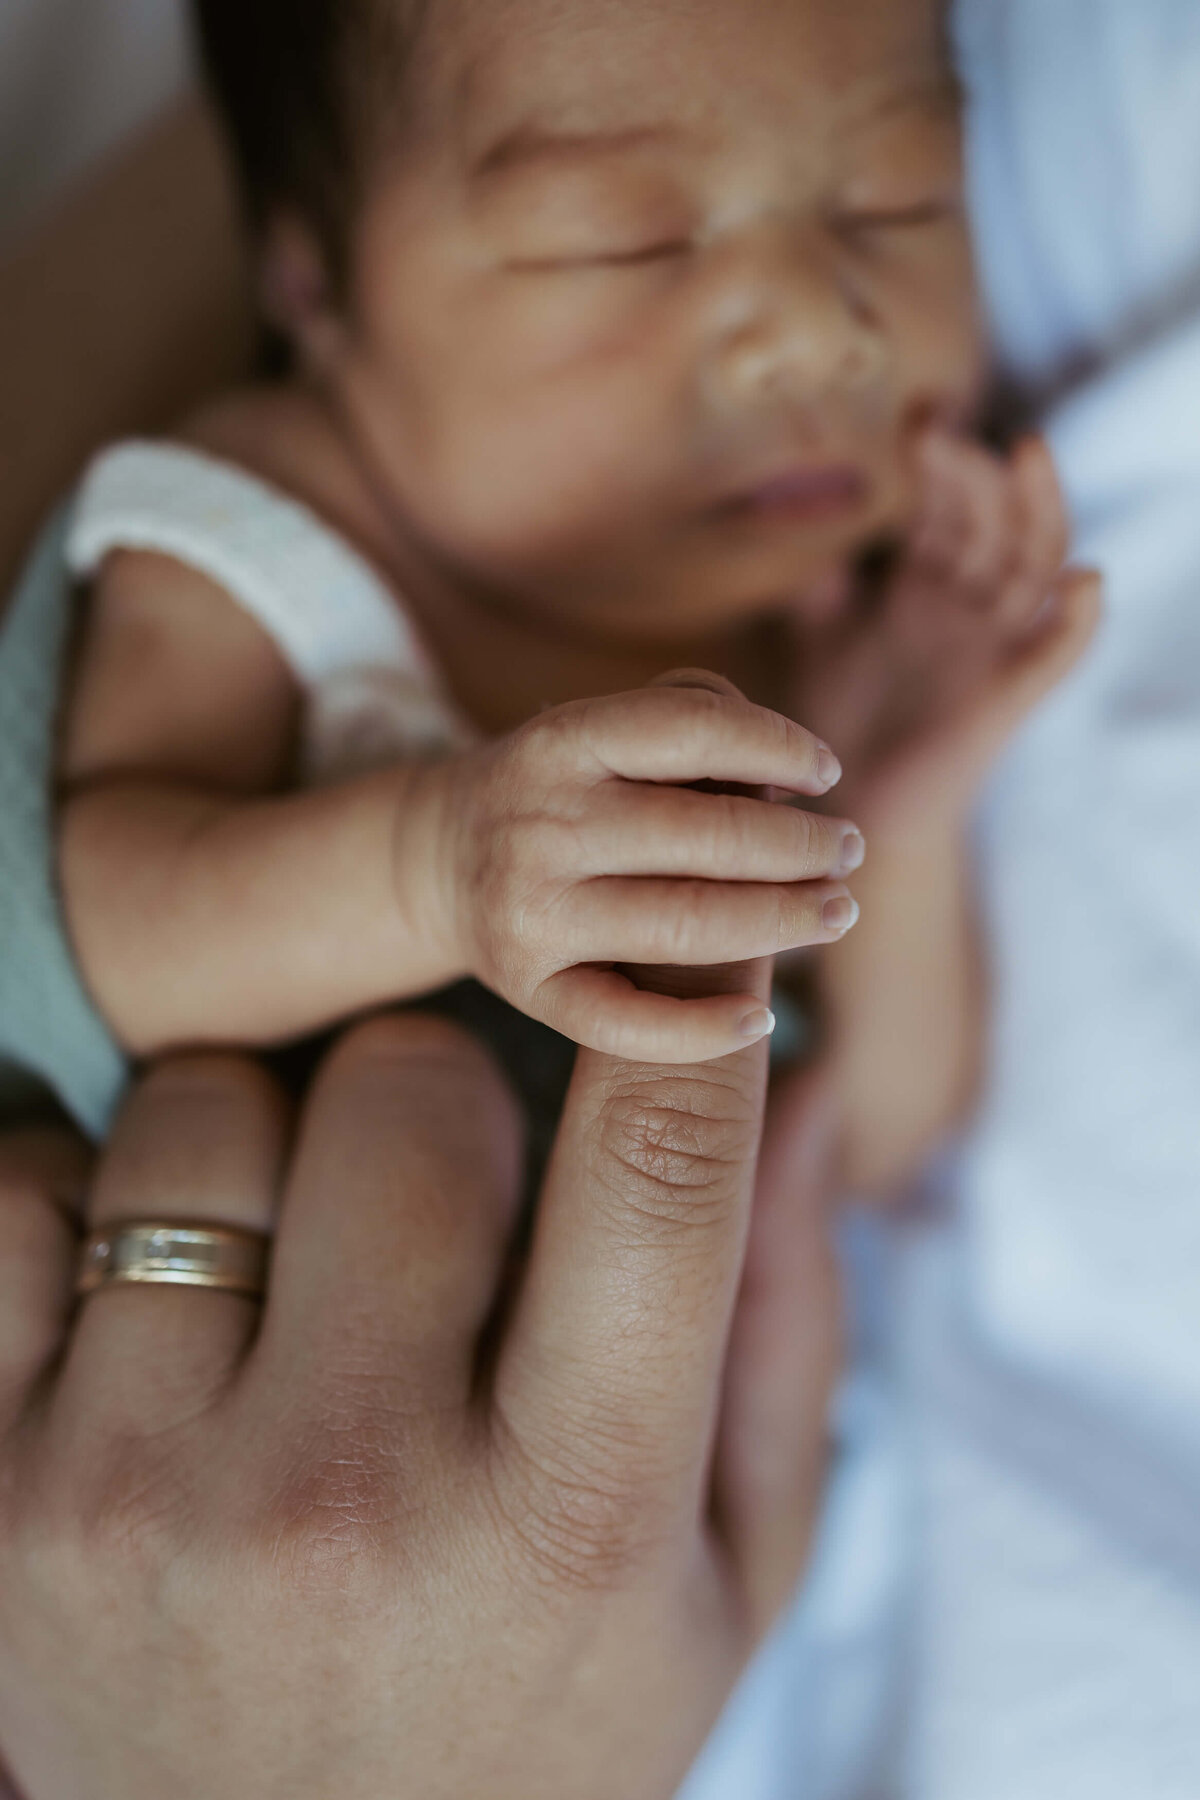 A close up of a newborn baby tightly holding onto her parent's finger as they sleep.